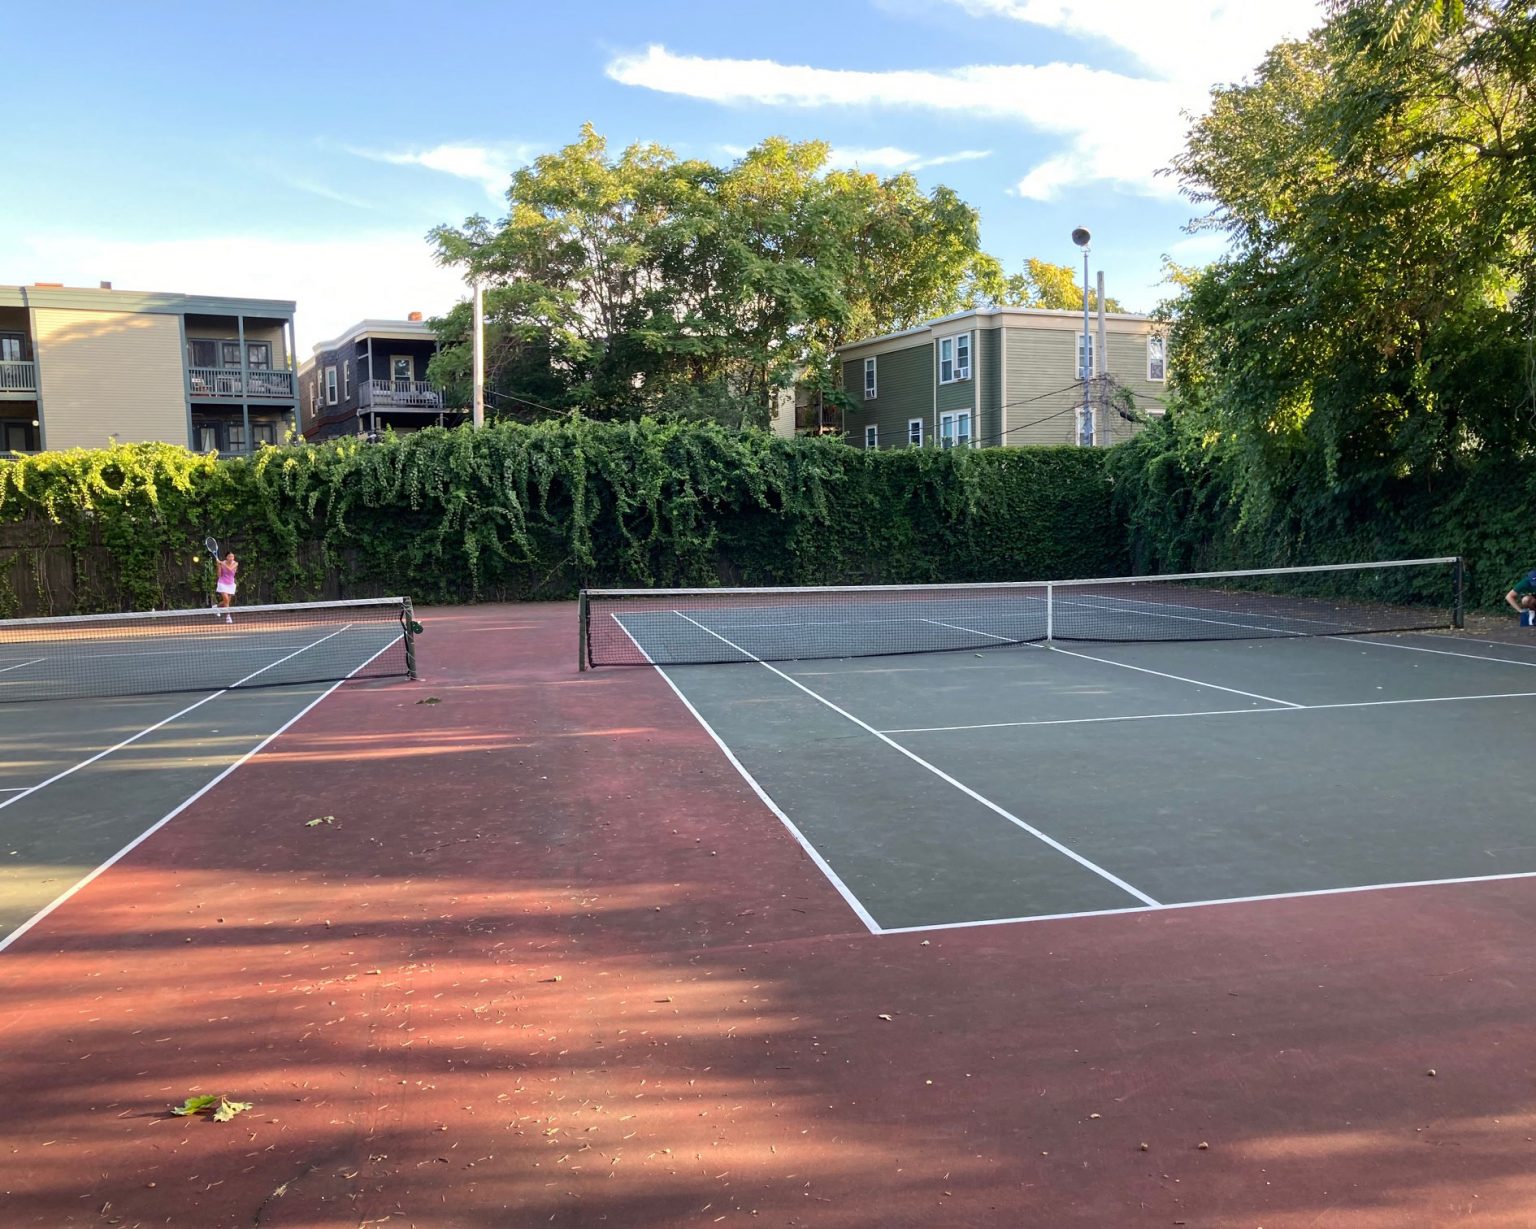 Cambridge Tennis Courts: Find The Best Tennis Courts in Cambridge MA